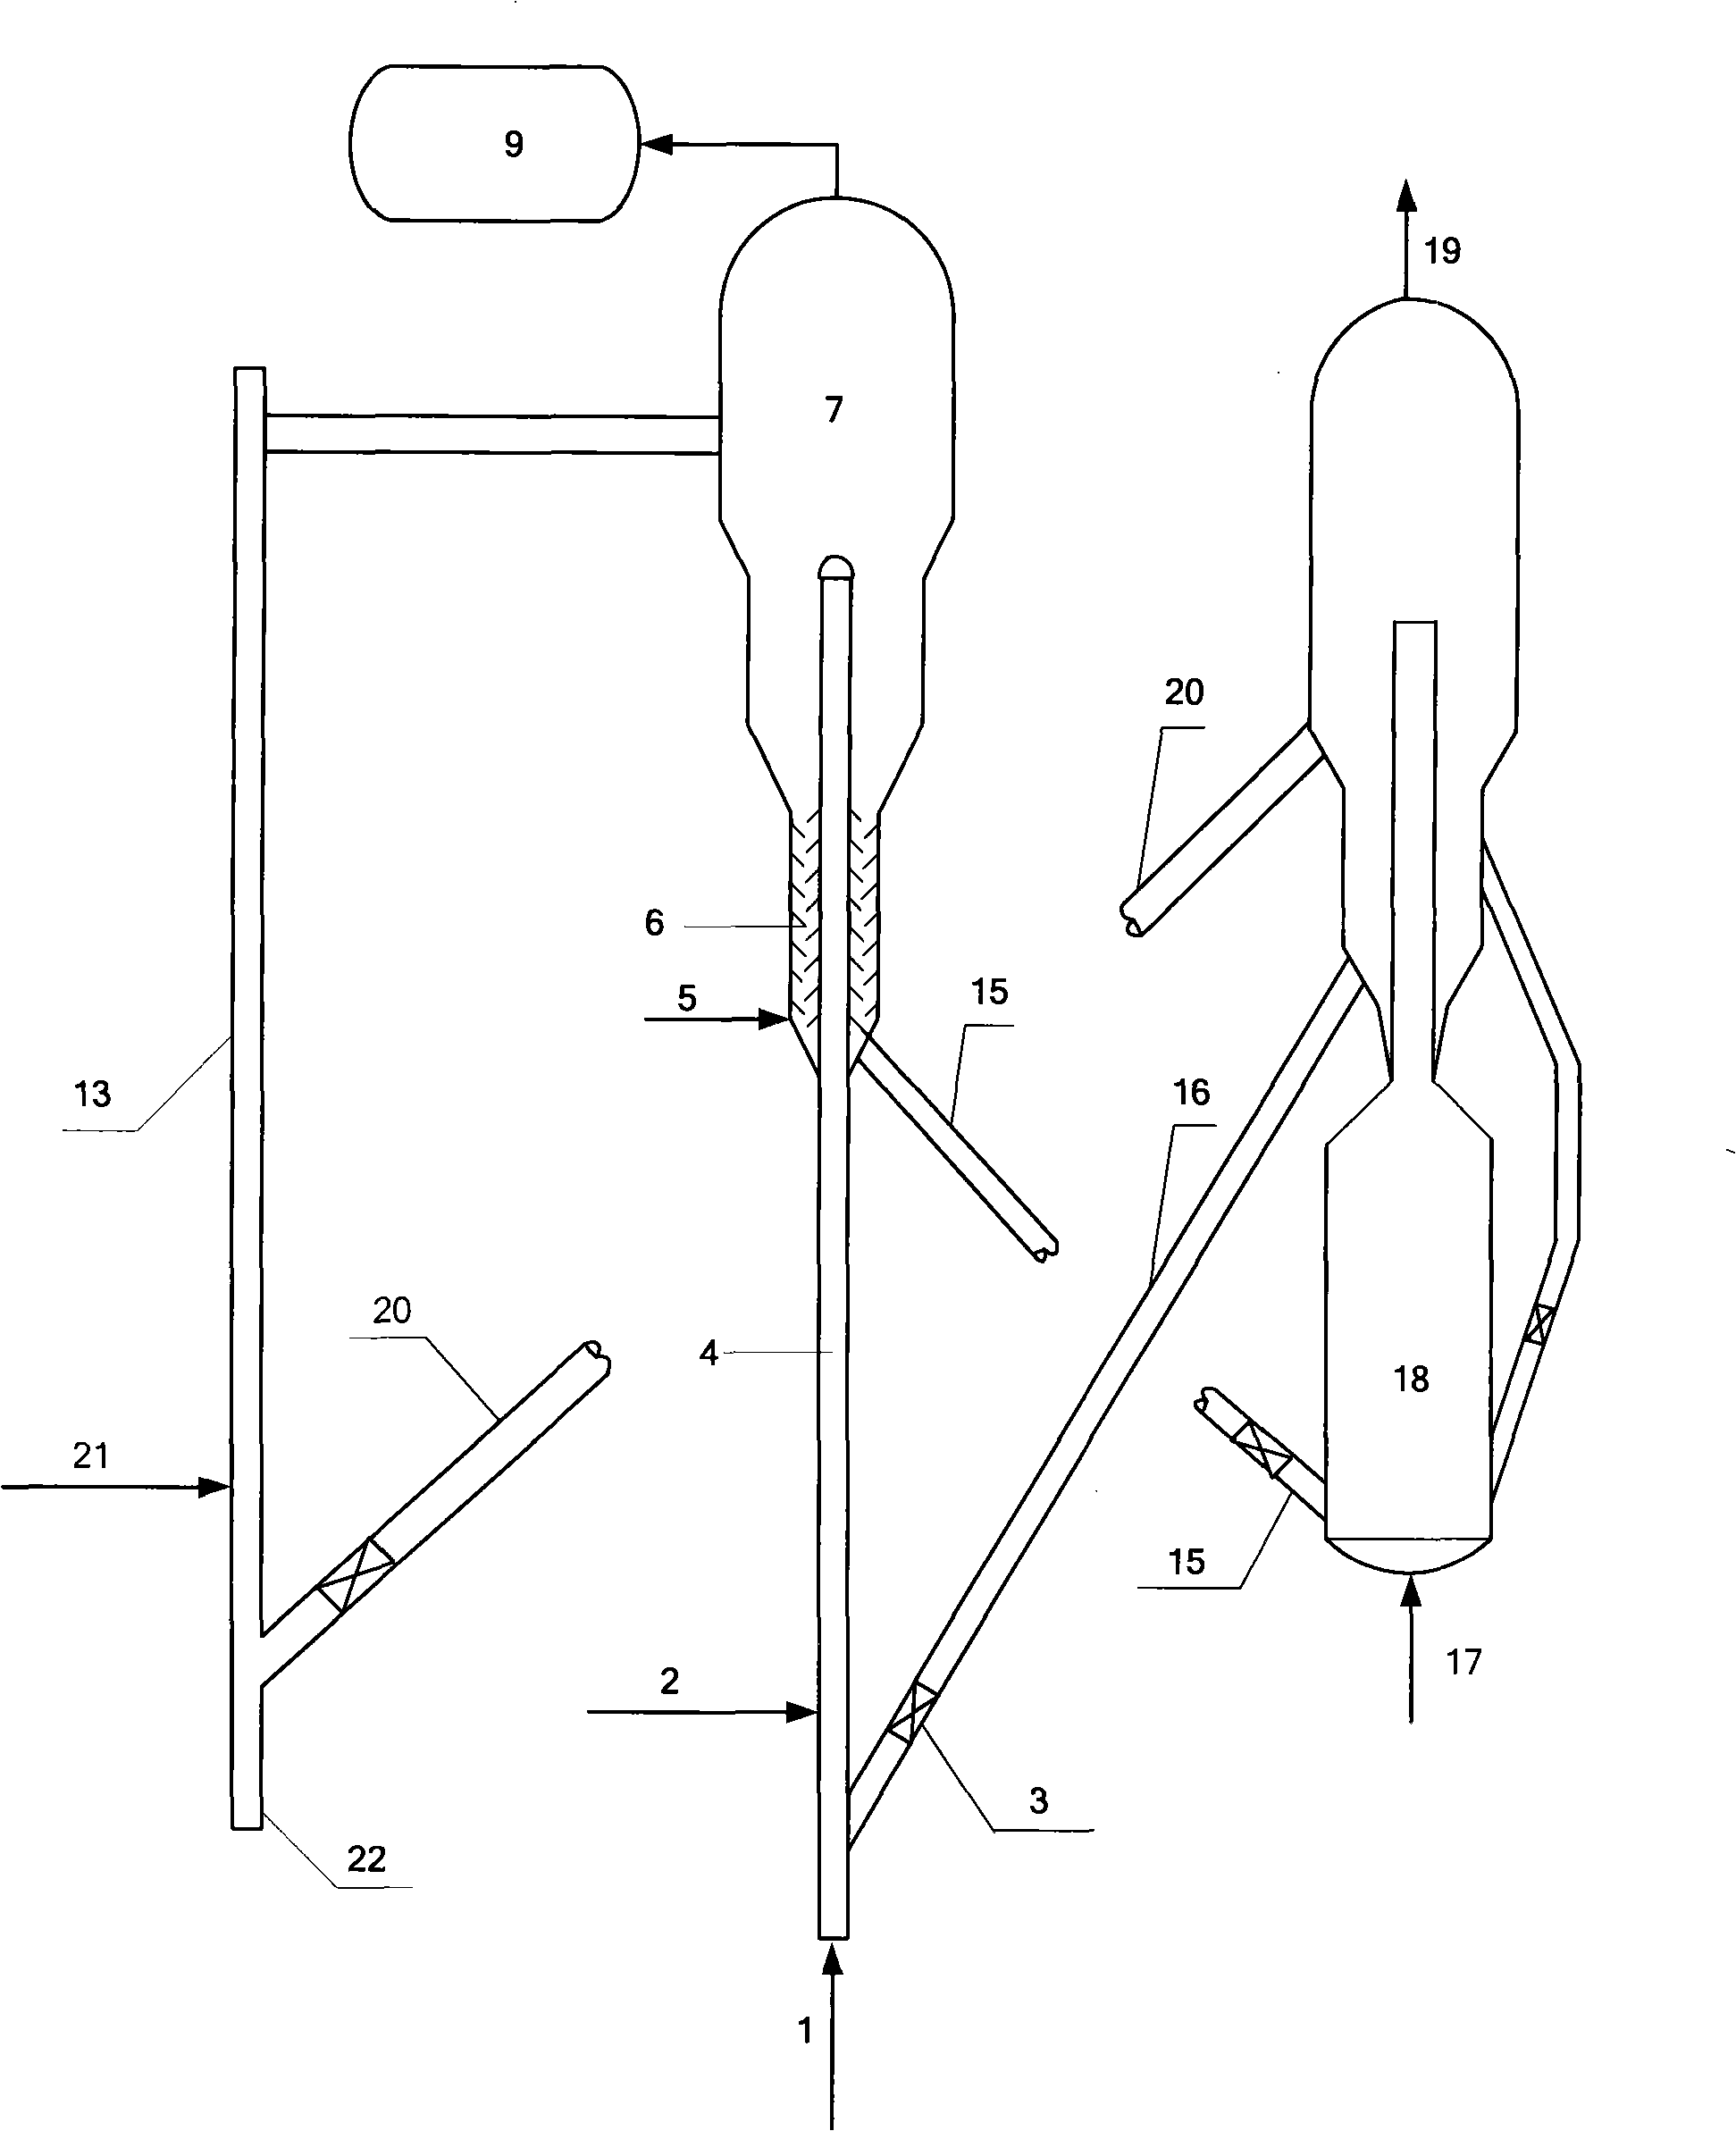 Method for producing high-octane gasoline with bastard crude oil